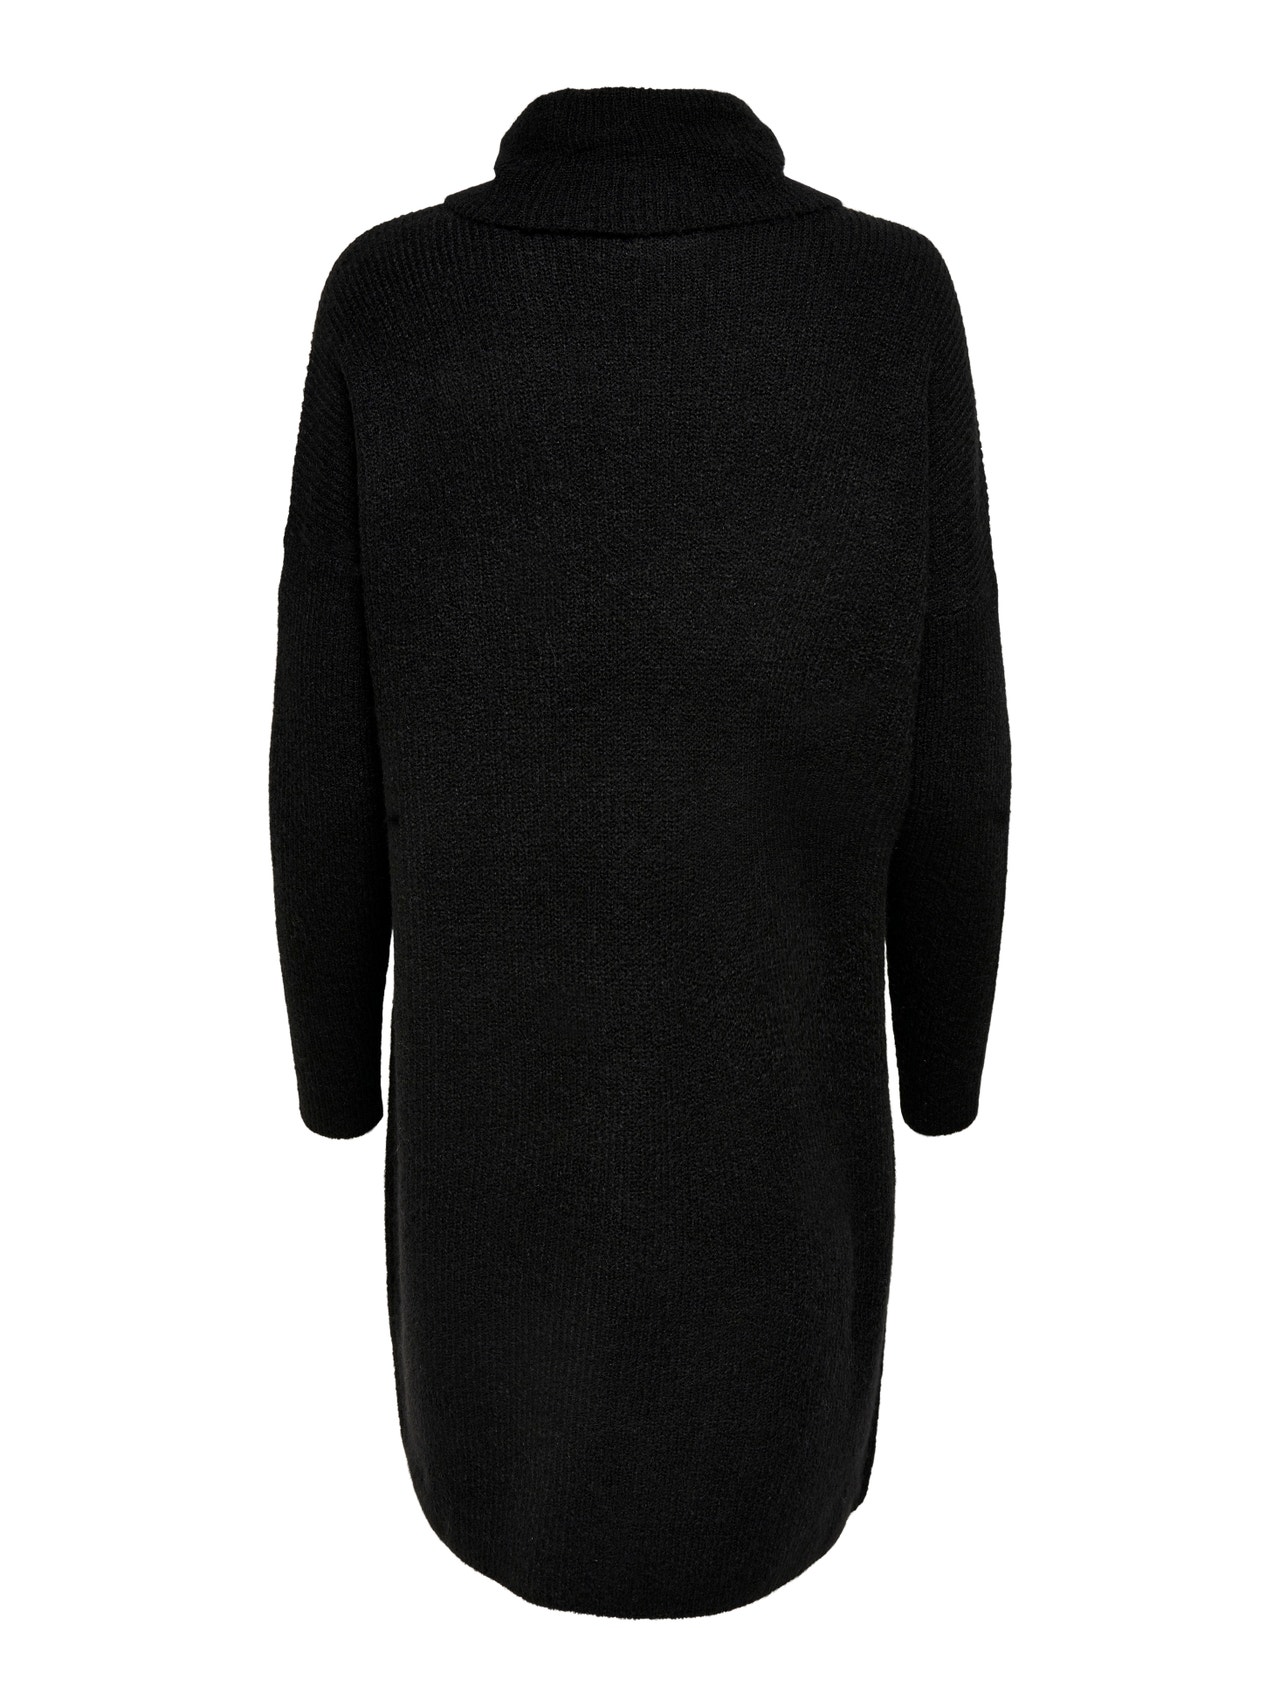 ONLY Robe longue Loose Fit Col bénitier -Black - 15140166